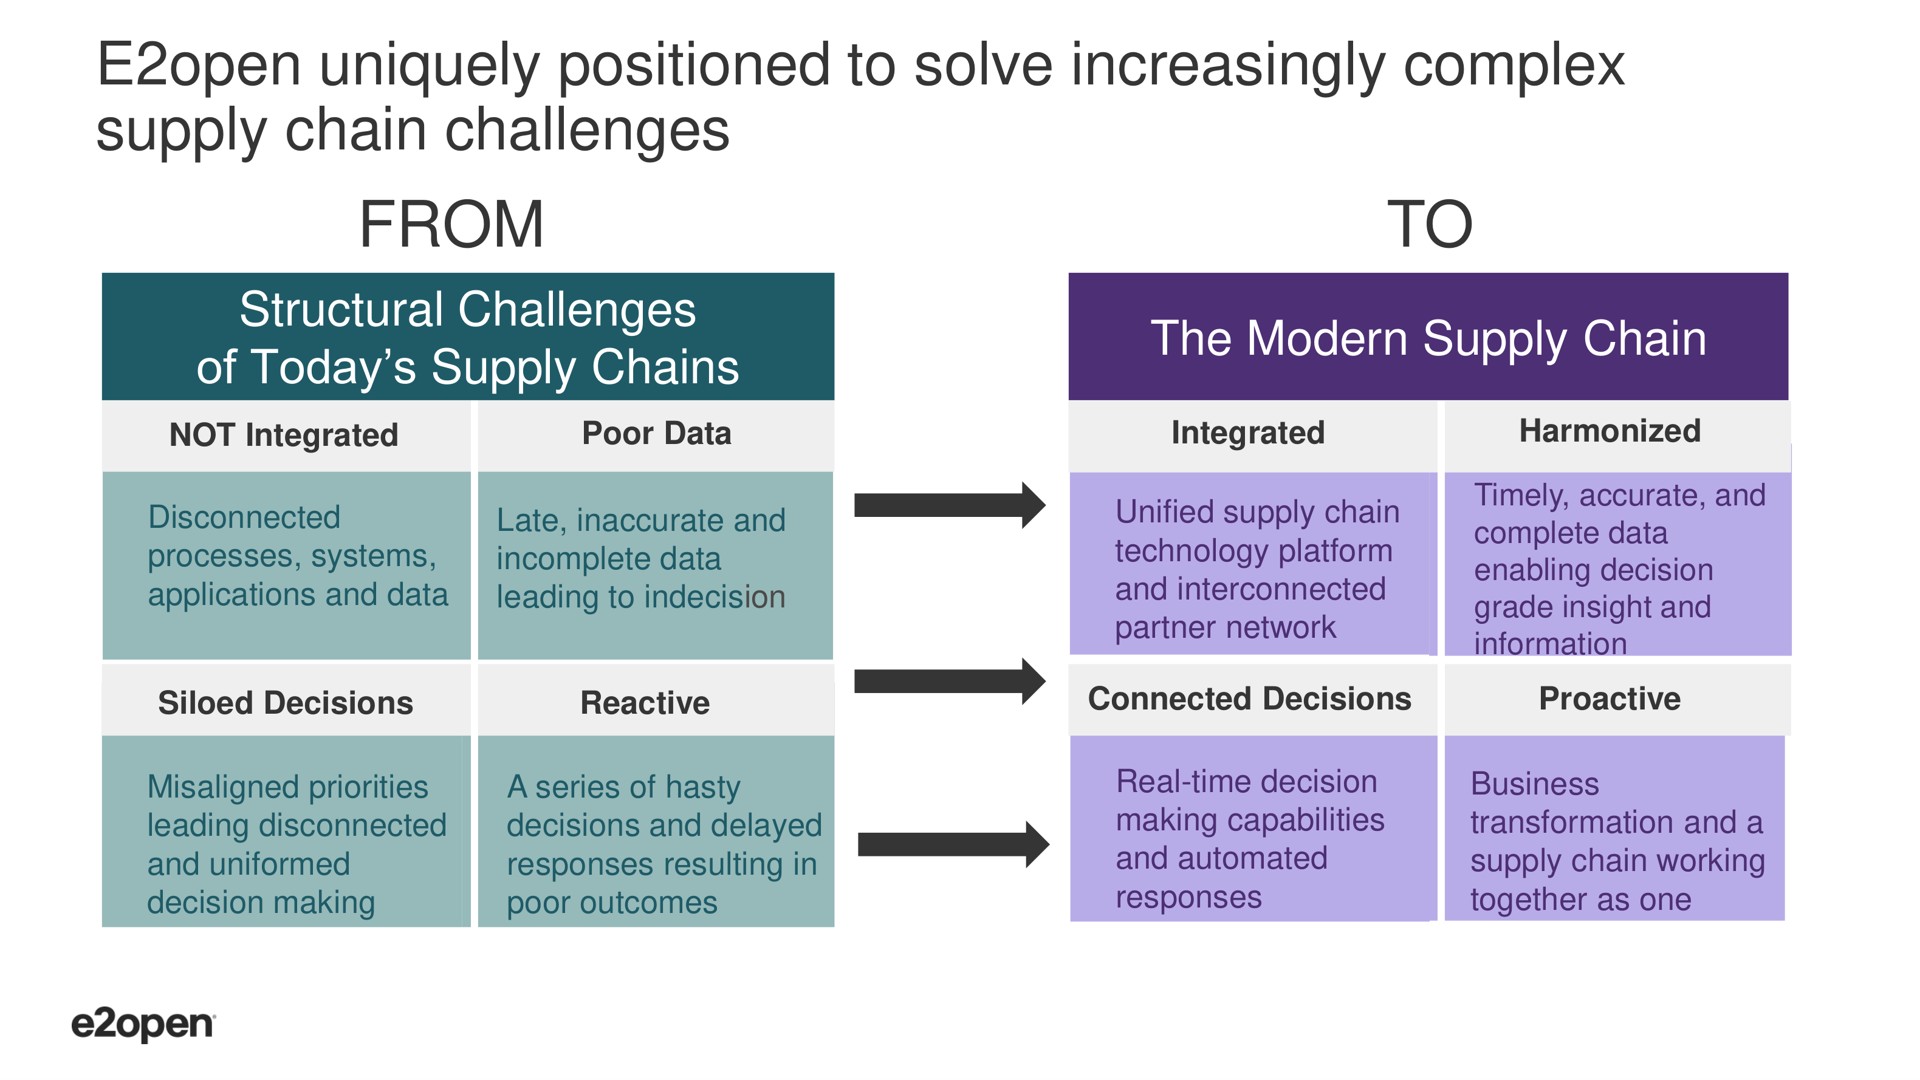 open uniquely positioned to solve increasingly complex supply chain challenges from structural challenges of today supply chains to the modern supply chain | E2open